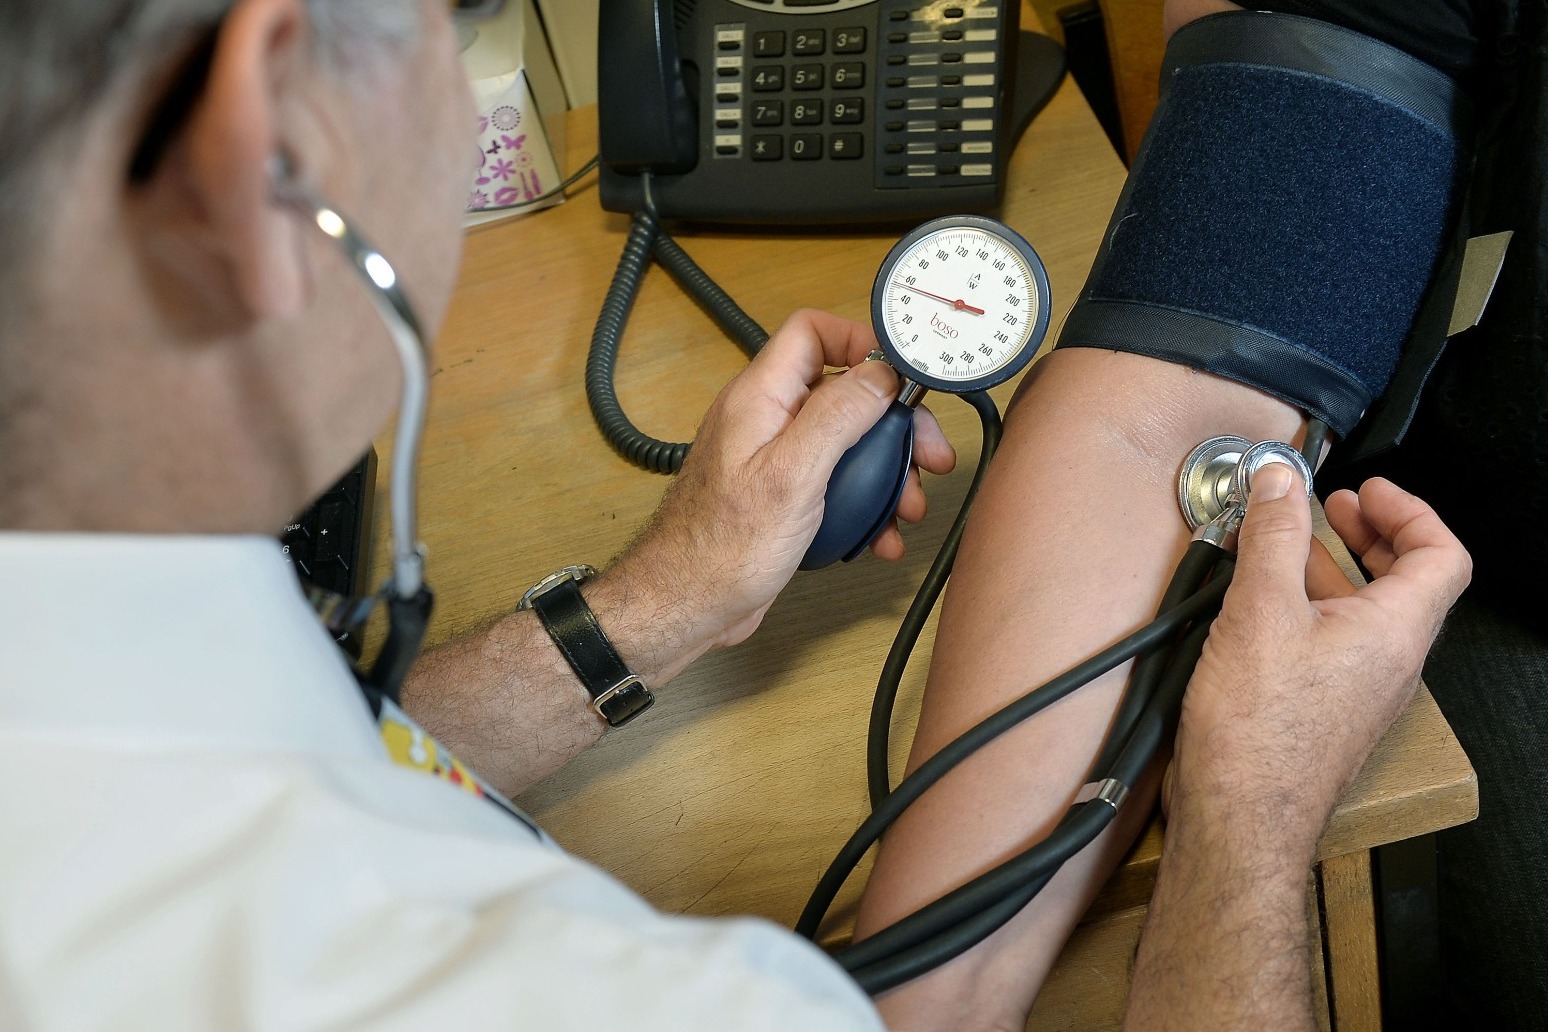 GPs carry out record amount of appointments while family doctor numbers drop 